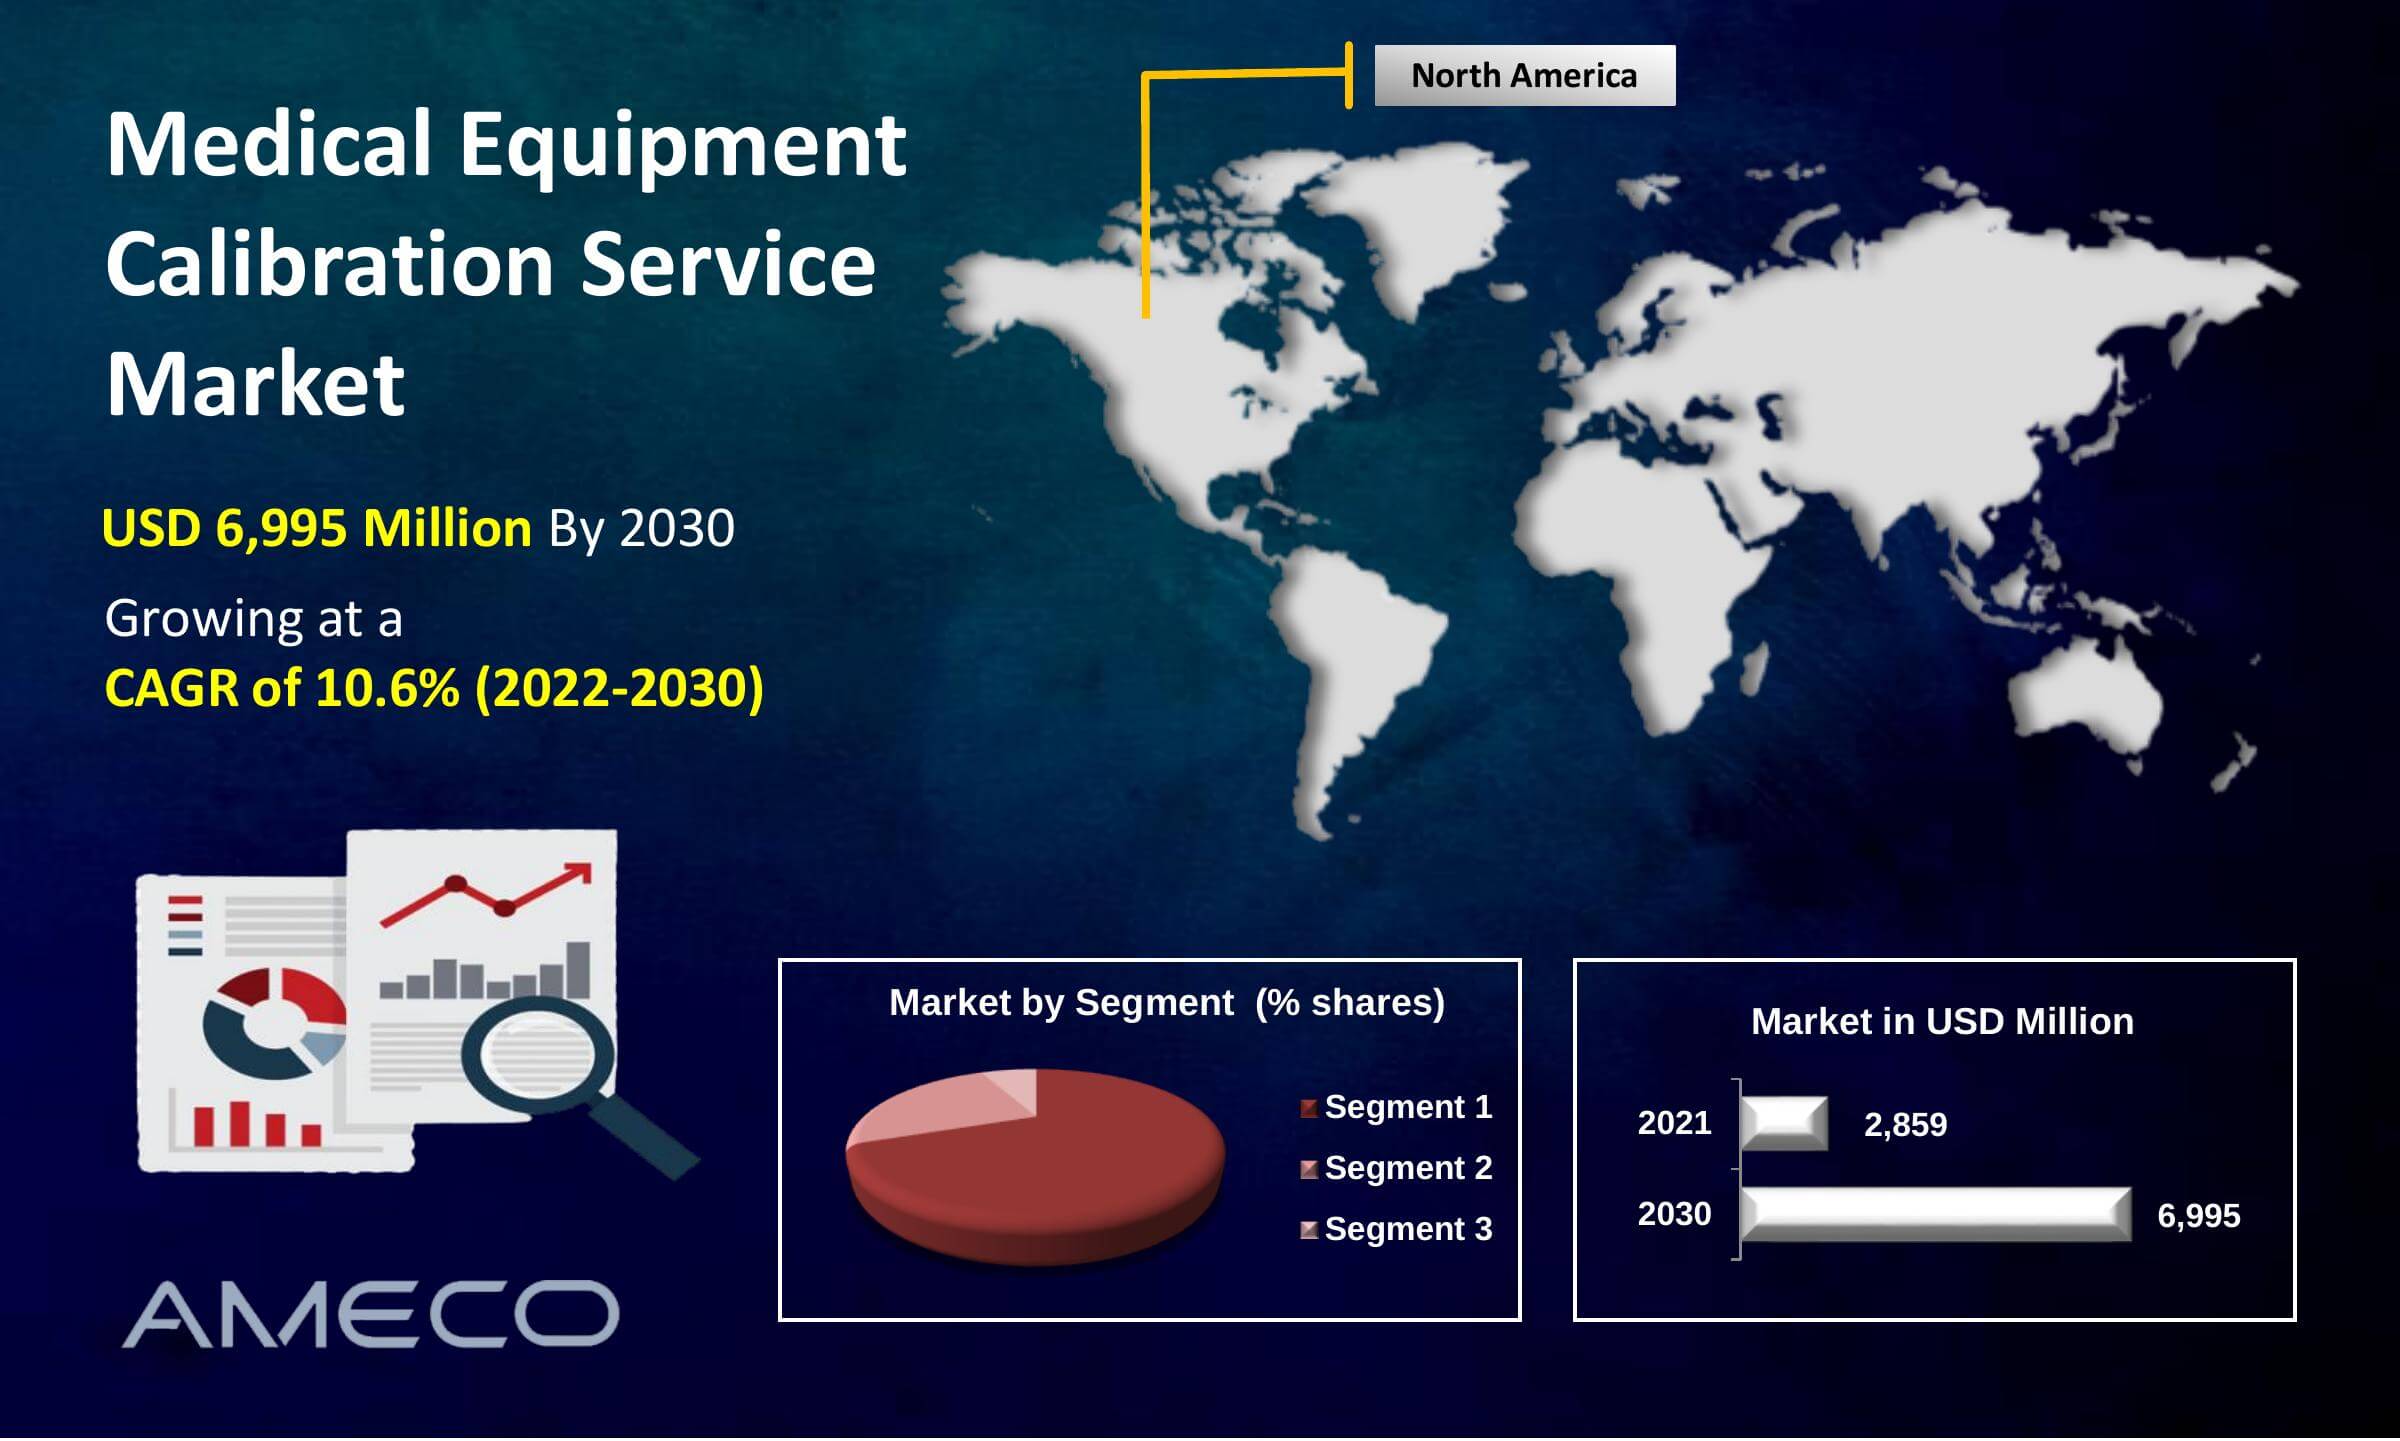 Medical Equipment Calibration Service Market Size, Share, Growth, Trends, and Forecast 2022-2030